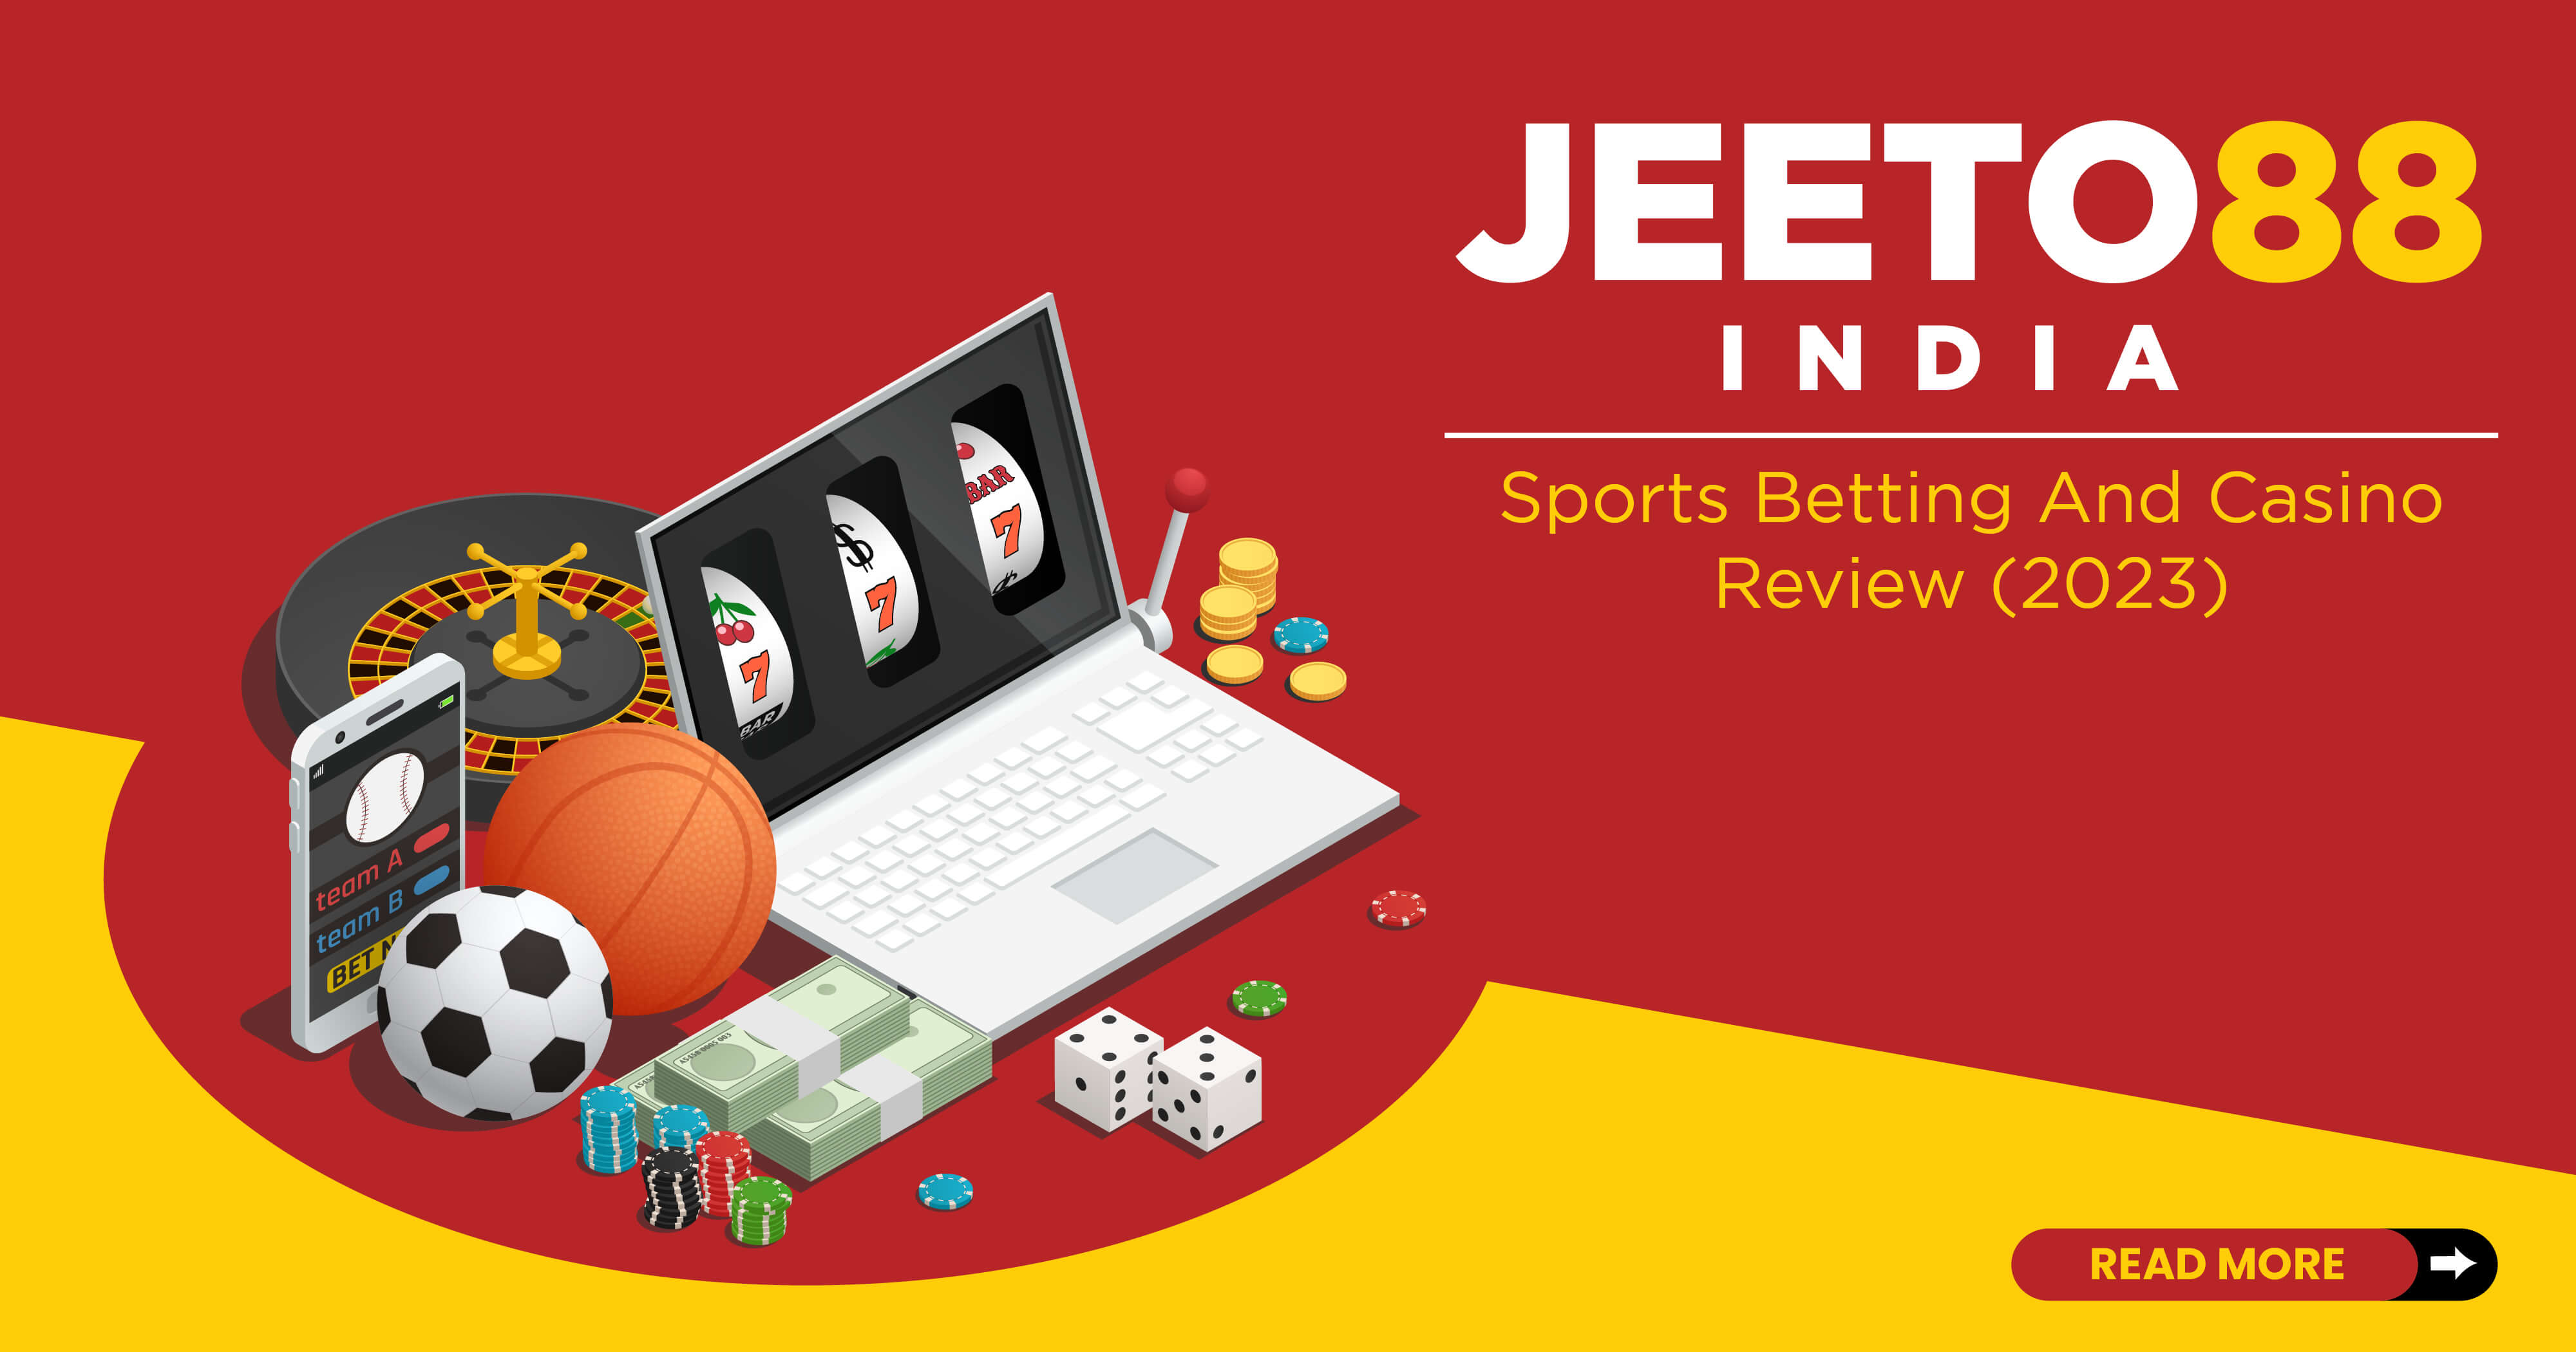 Jeeto88 India Sports Betting & Casino Review (2023)